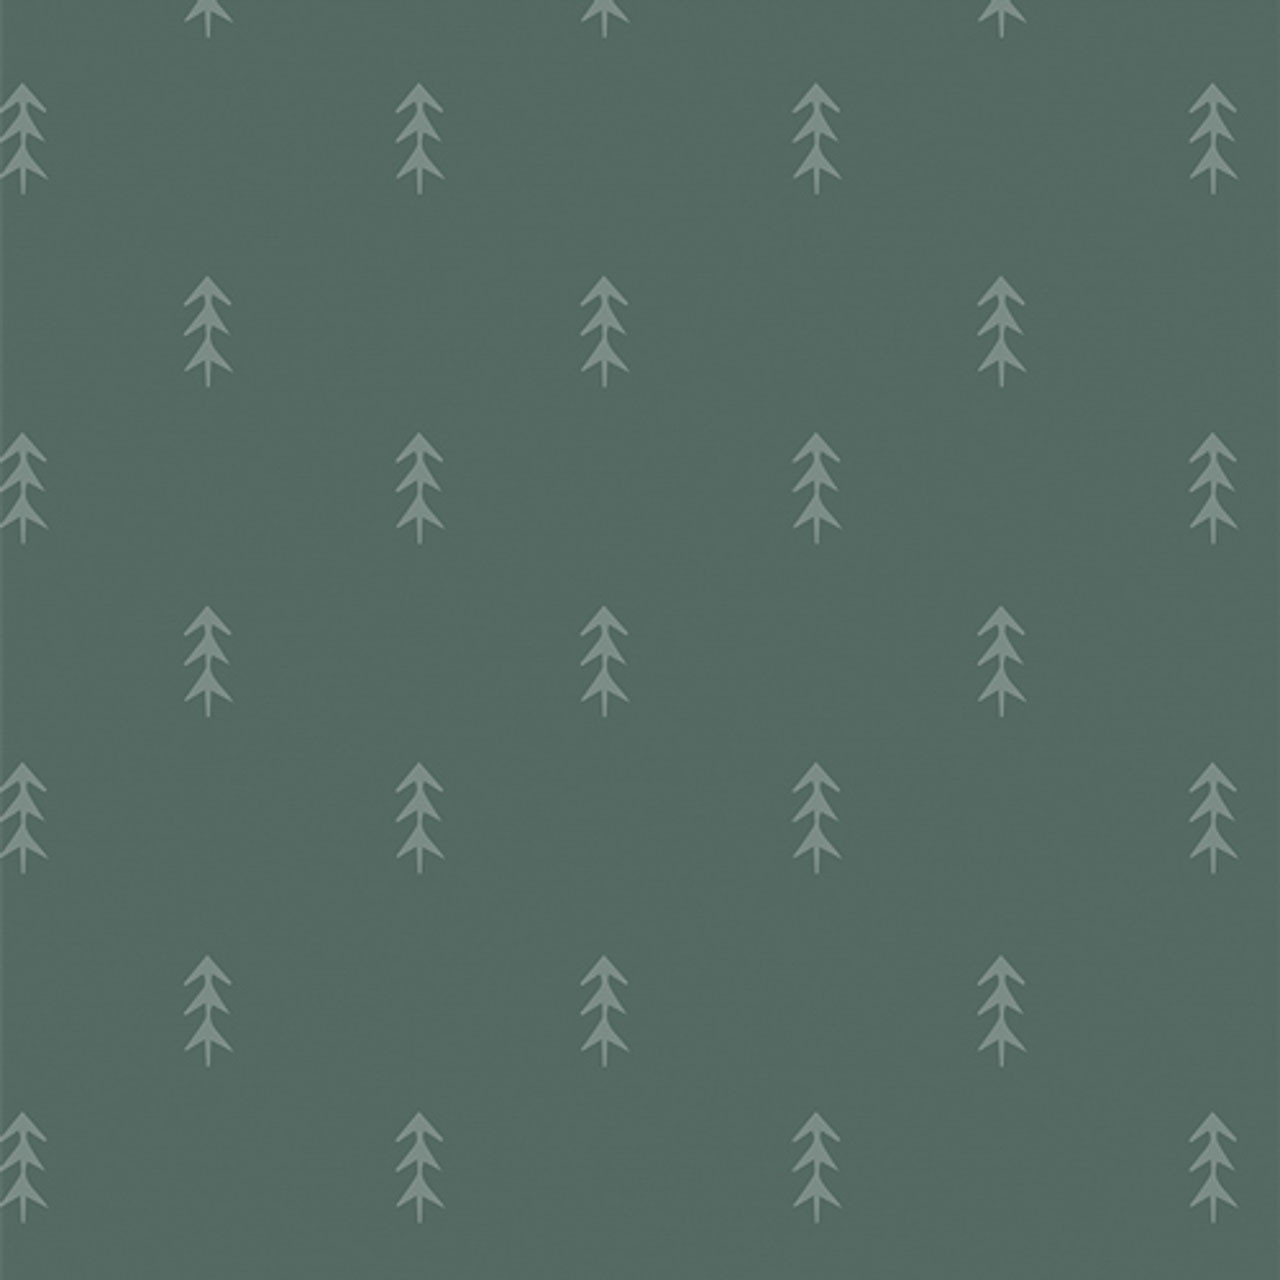 Green 100% cotton fabric with a simple tree pattern from Art Gallery Fabrics' Crafting Magic collection, named Simple Defoliage.